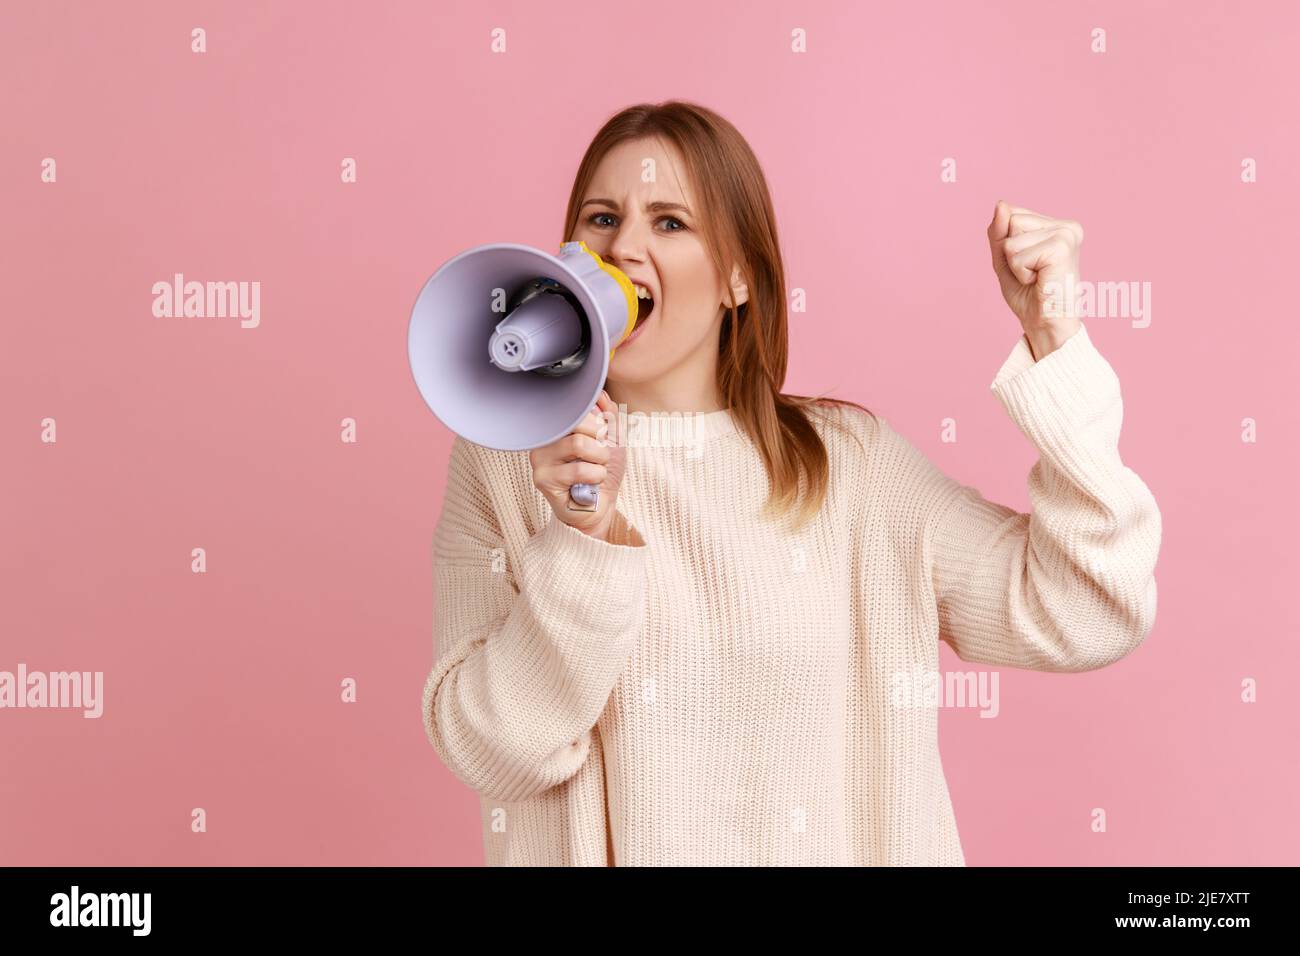 Portrait of serious concentrated blond woman protesting, raised arm and screaming in megaphone, looking at camera, wearing white sweater. Indoor studio shot isolated on pink background. Stock Photo